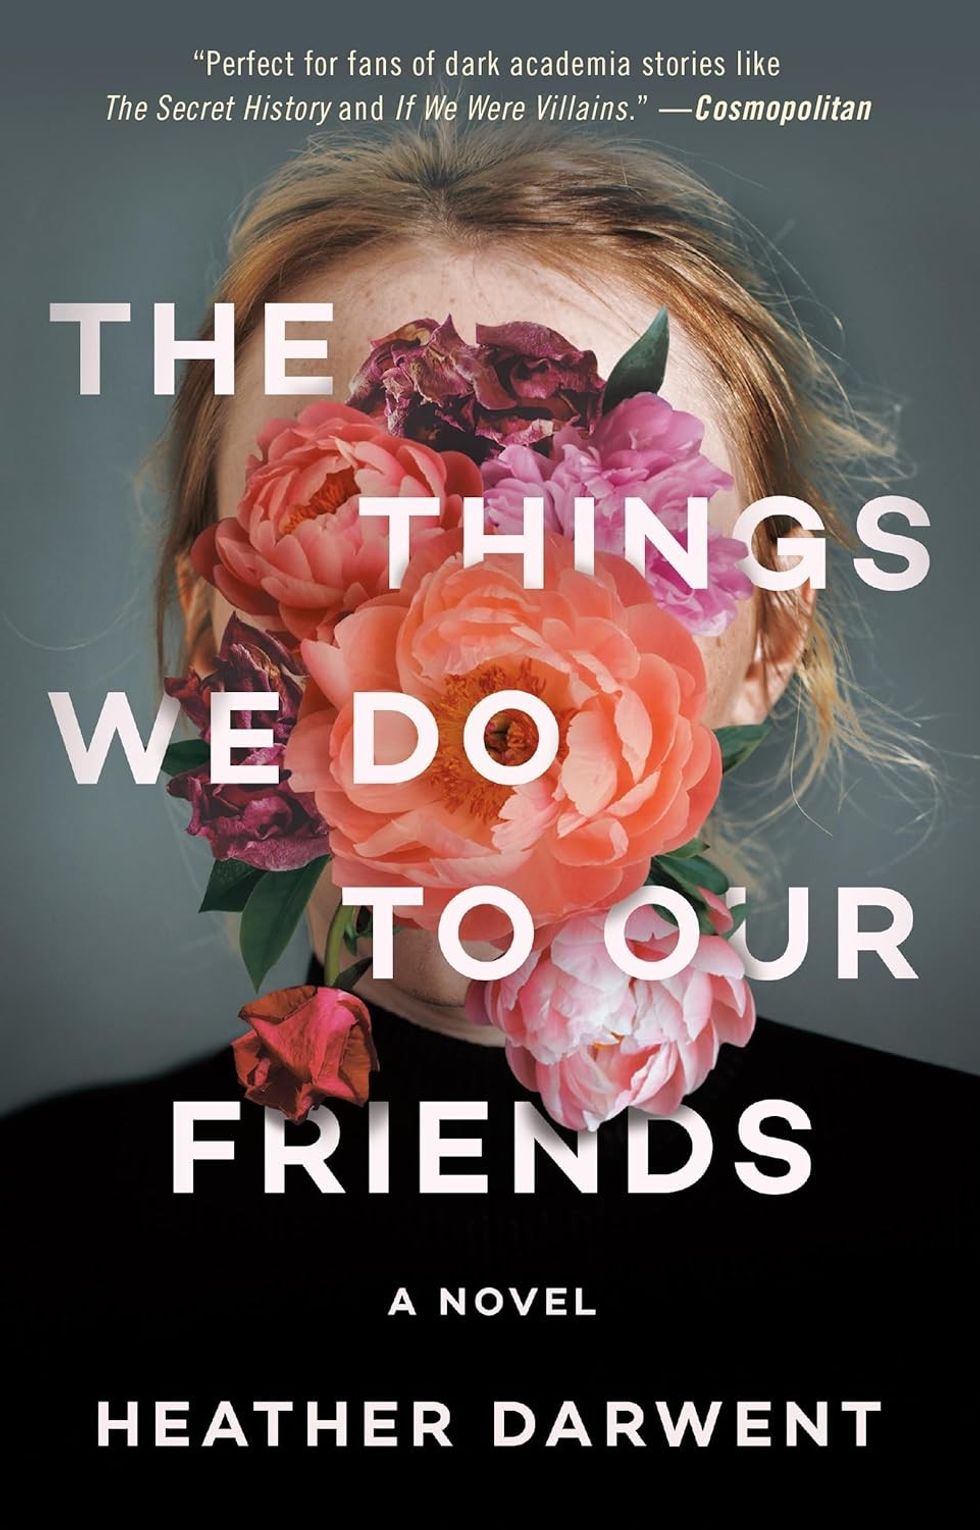 "The Things We Do to Our Friends" by Heather Darwent